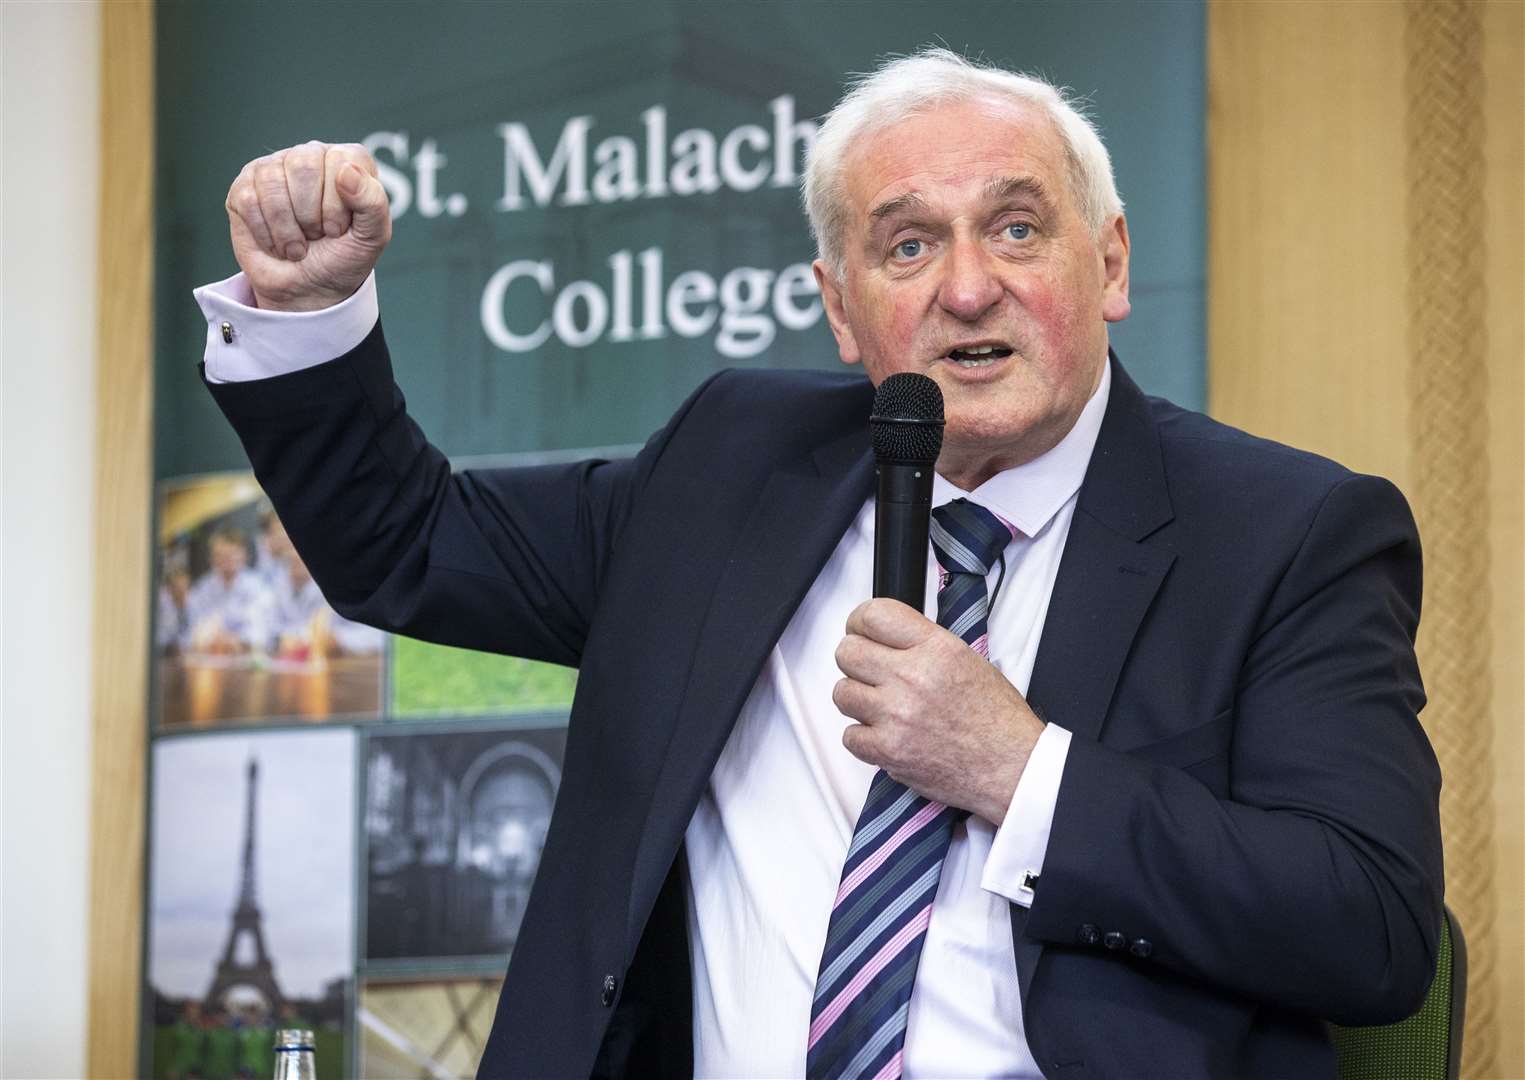 Former taoiseach Bertie Ahern said there were a number of elements of the Good Friday Agreement which were difficult (Liam McBurney/PA)